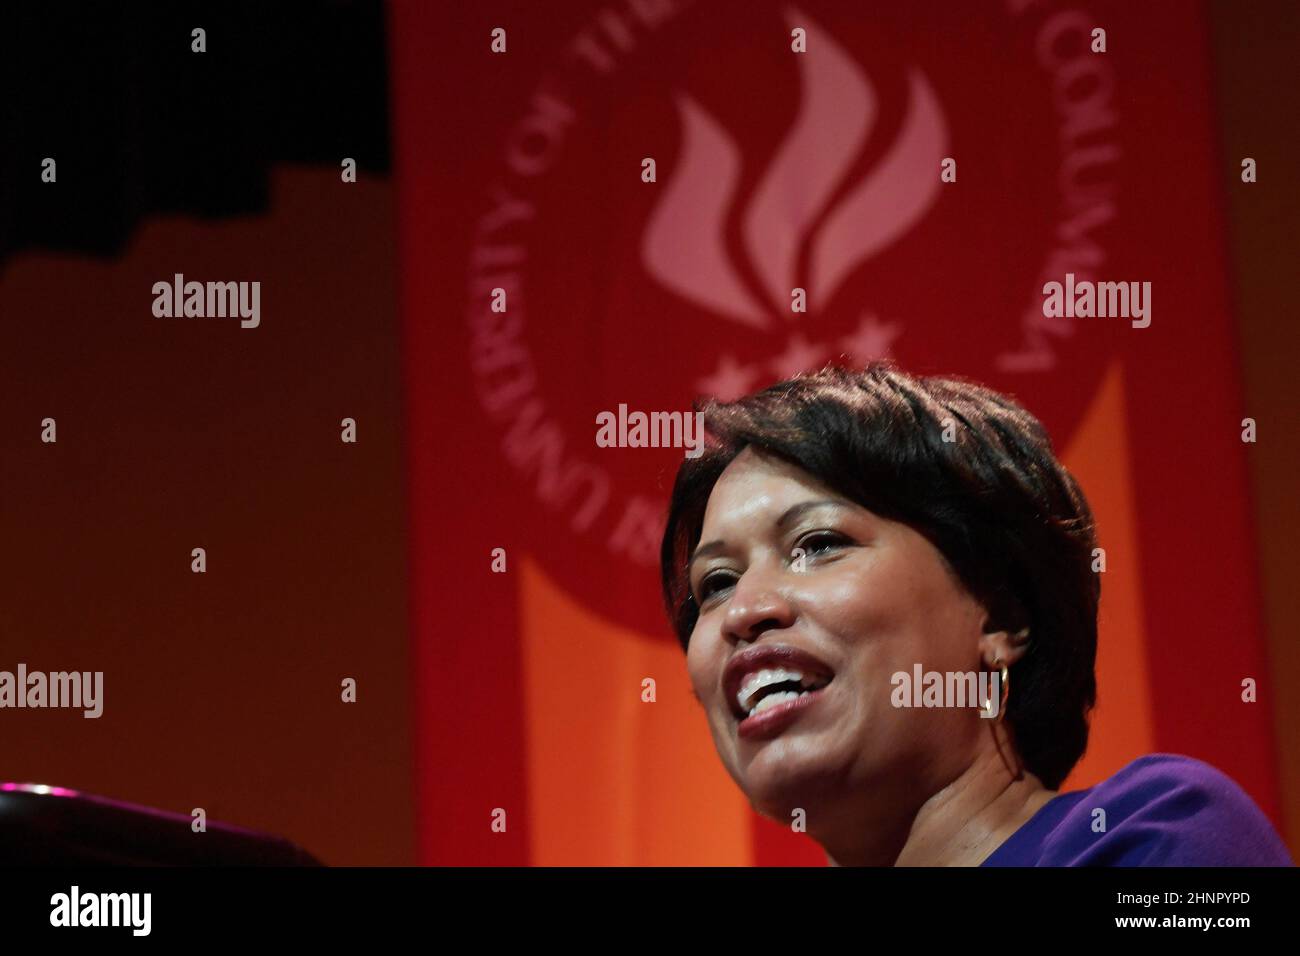 February 17, 2022, Washington, Distric of Columbia, USA: DC Mayor MURIEL BOWSER deliver remarks about Afroamerican people legacy during the UDC Funders Day 2022 celebration, today on February 17, 2022 at the University of the District of Columbia in Washington DC, USA. (Credit Image: © Lenin Nolly/ZUMA Press Wire) Stock Photo